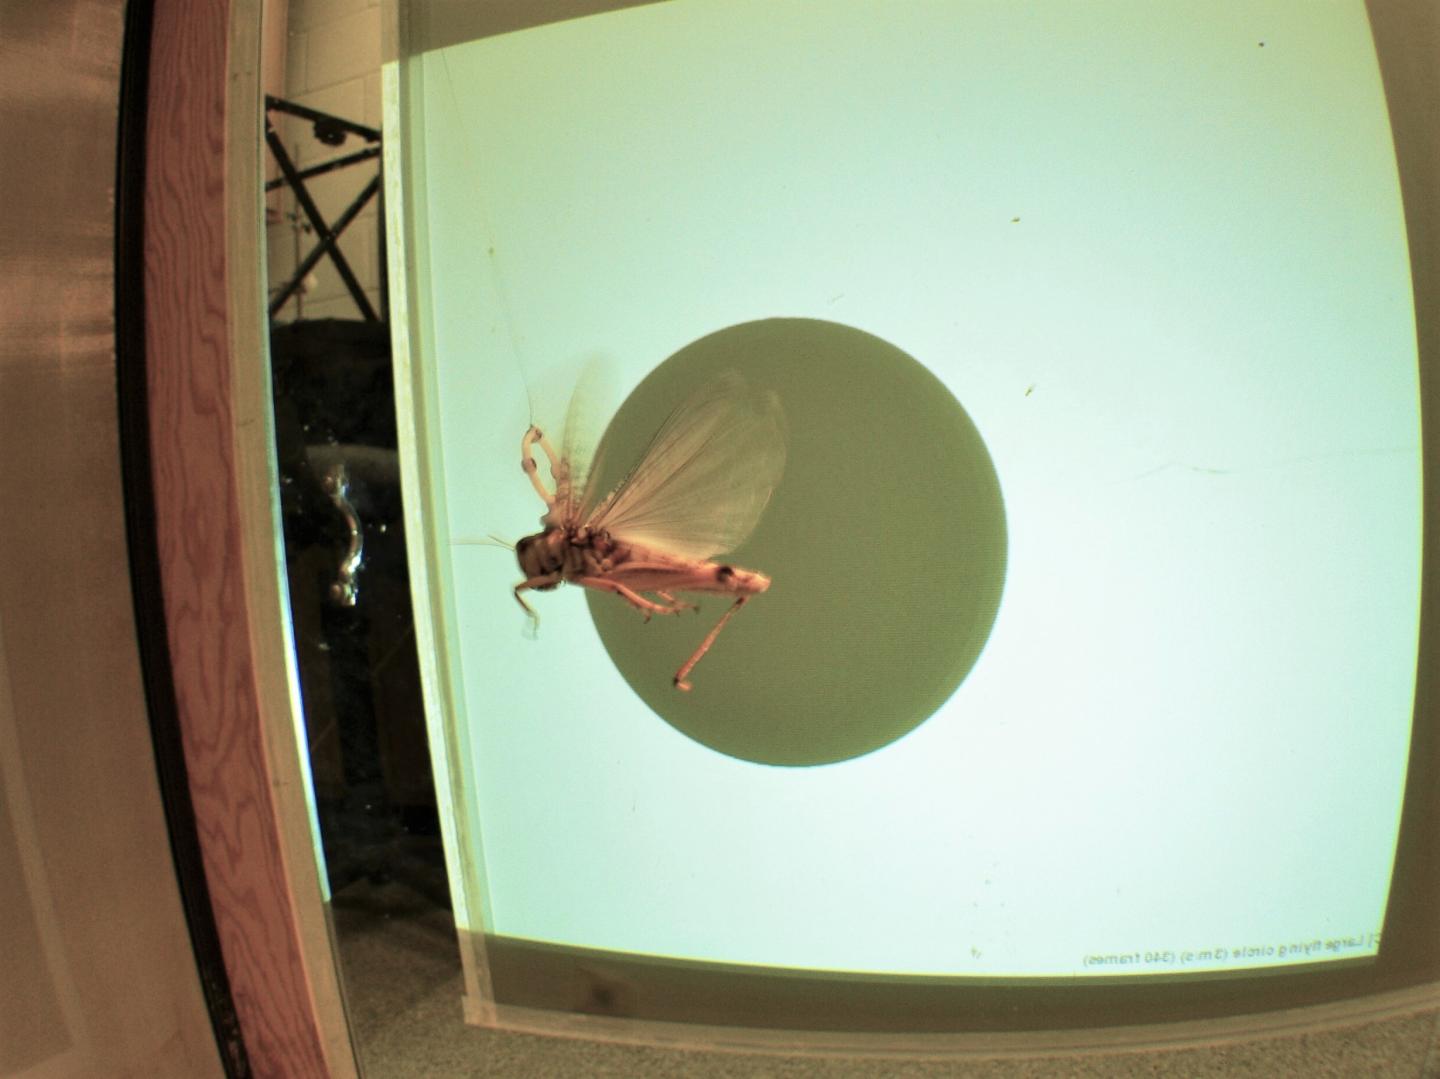 A Locust Flying in a Wind Tunnel to Test Its Vision